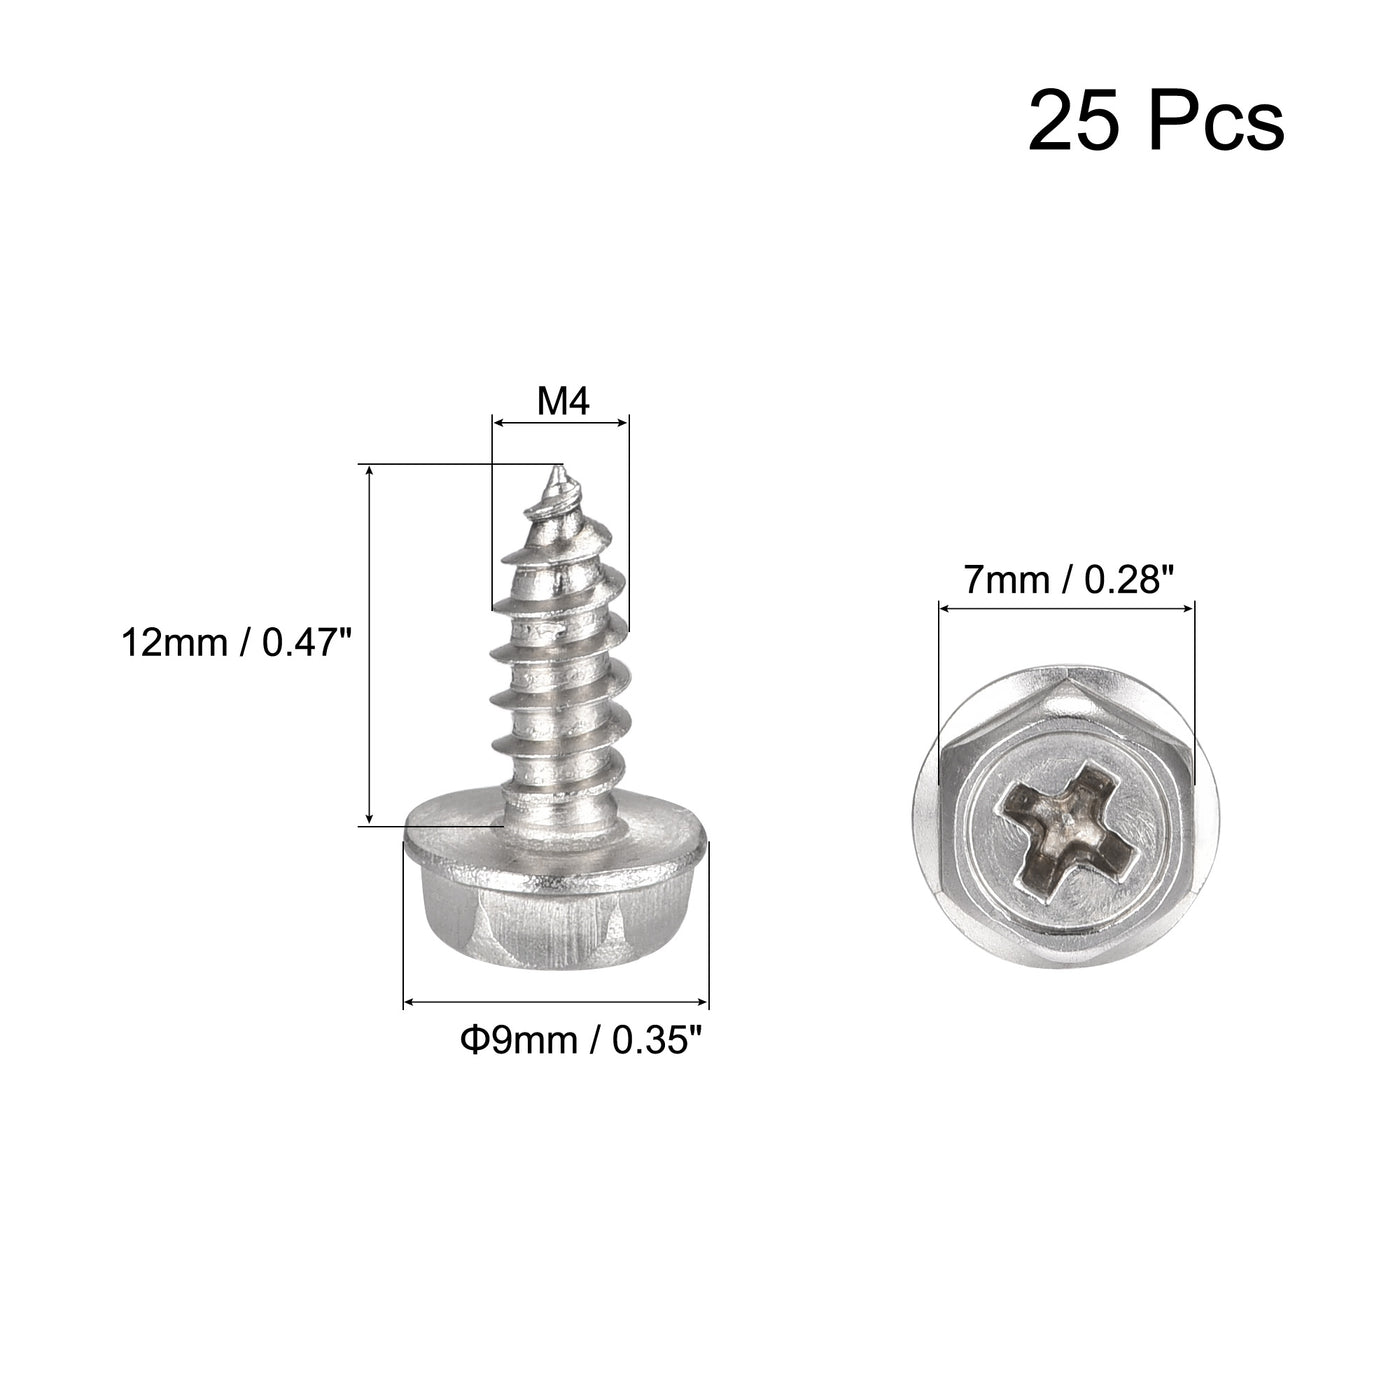 uxcell Uxcell Phillips Hex Washer Self Tapping Screws, M4 x 12mm 304 Stainless Steel Hex Flange Sheet Metal Screw 25pcs